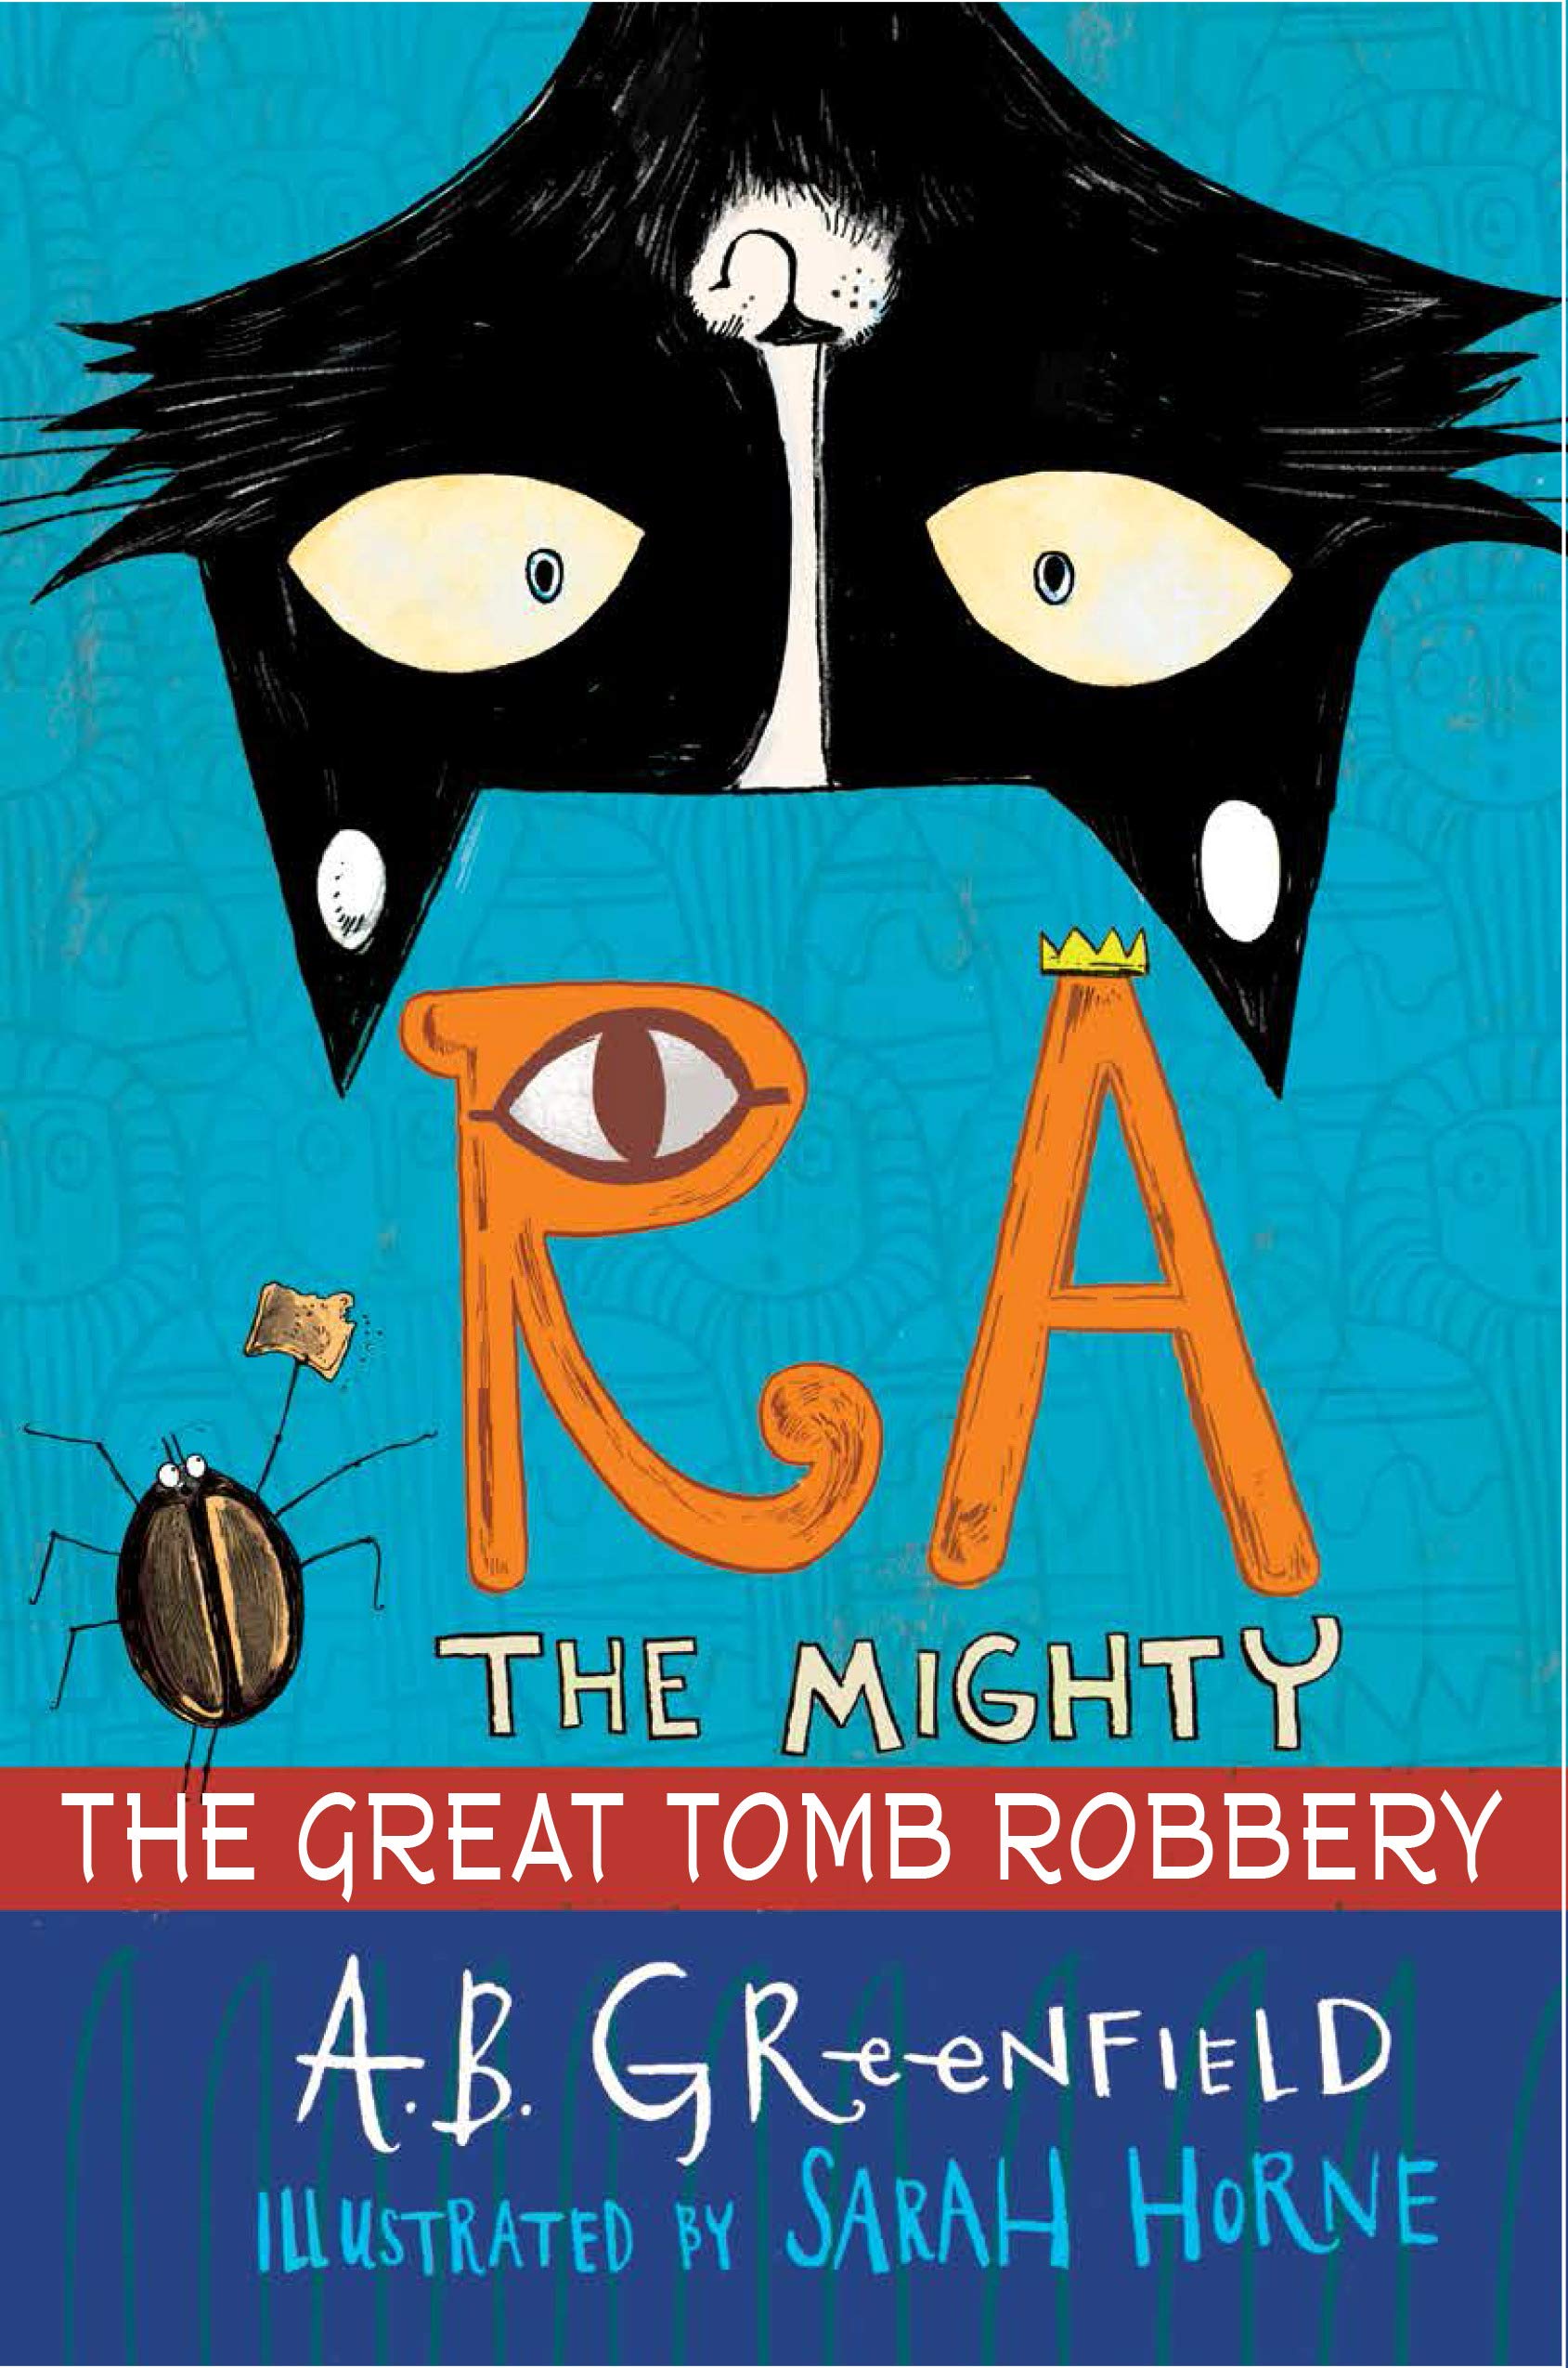 Ra the Mighty: The Great Tomb Robbery